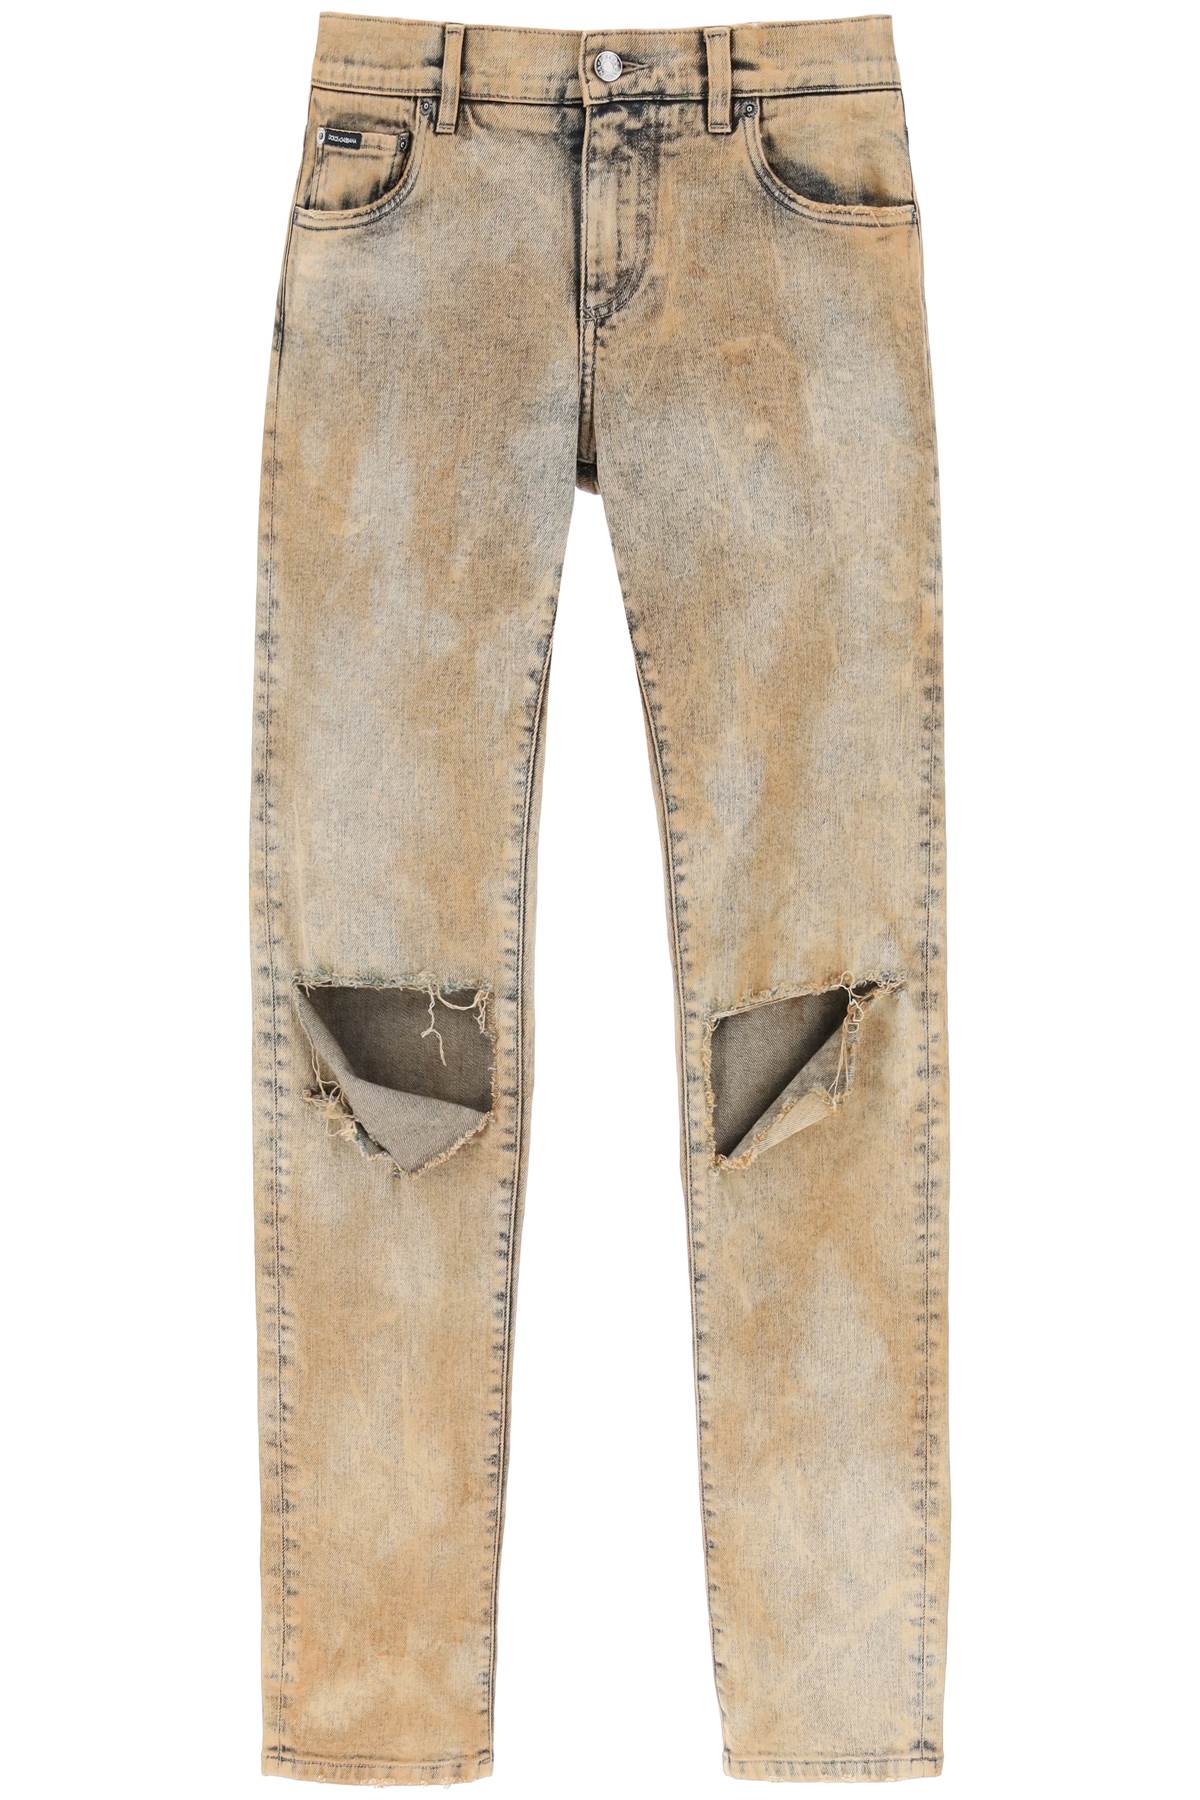 DOLCE & GABBANA DISTRESSED RUSTED JEANS